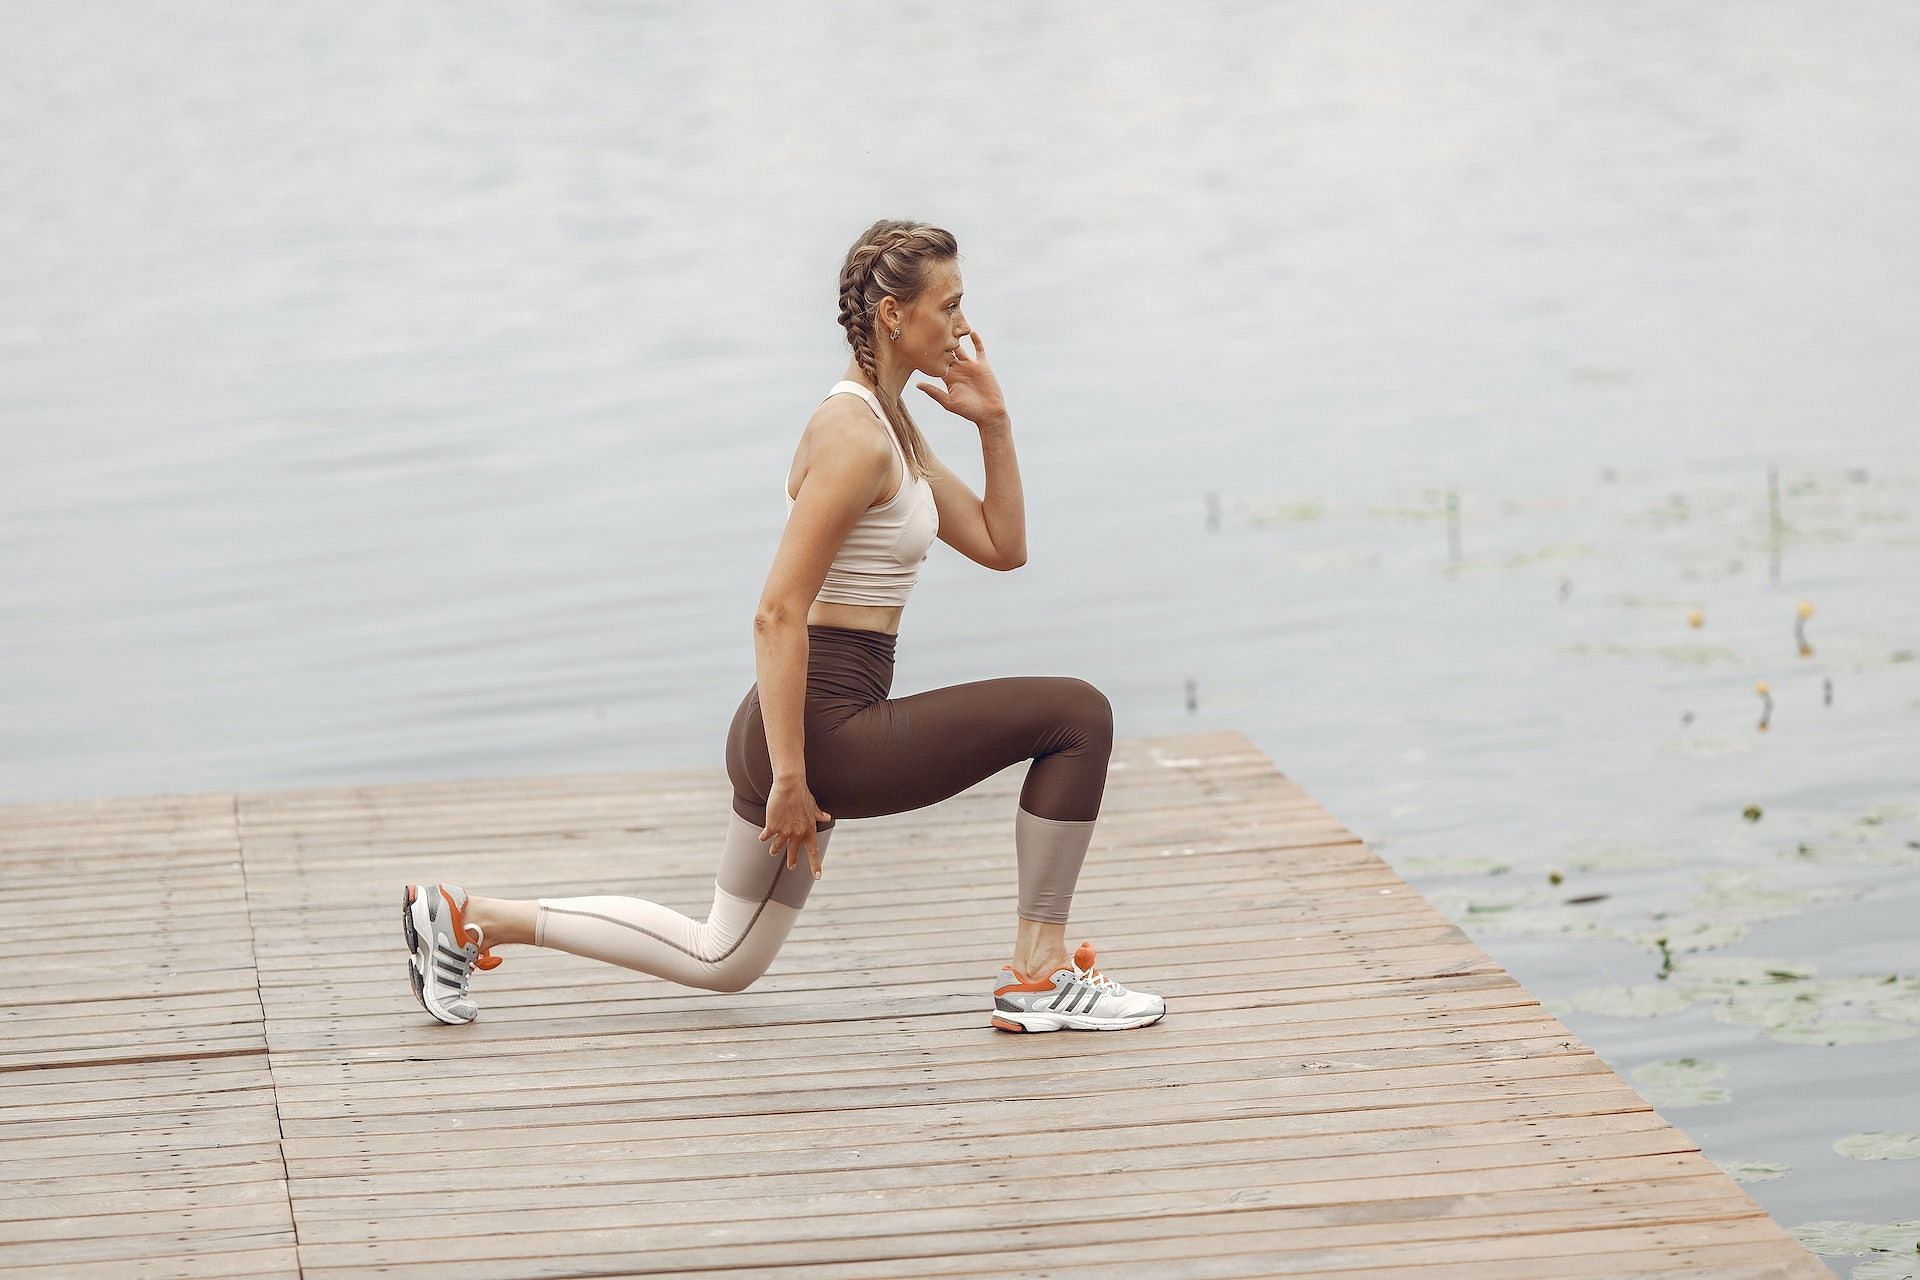 Lunges are an easy hamstring exercise. (Image via Pexels/Gustavo Fring)